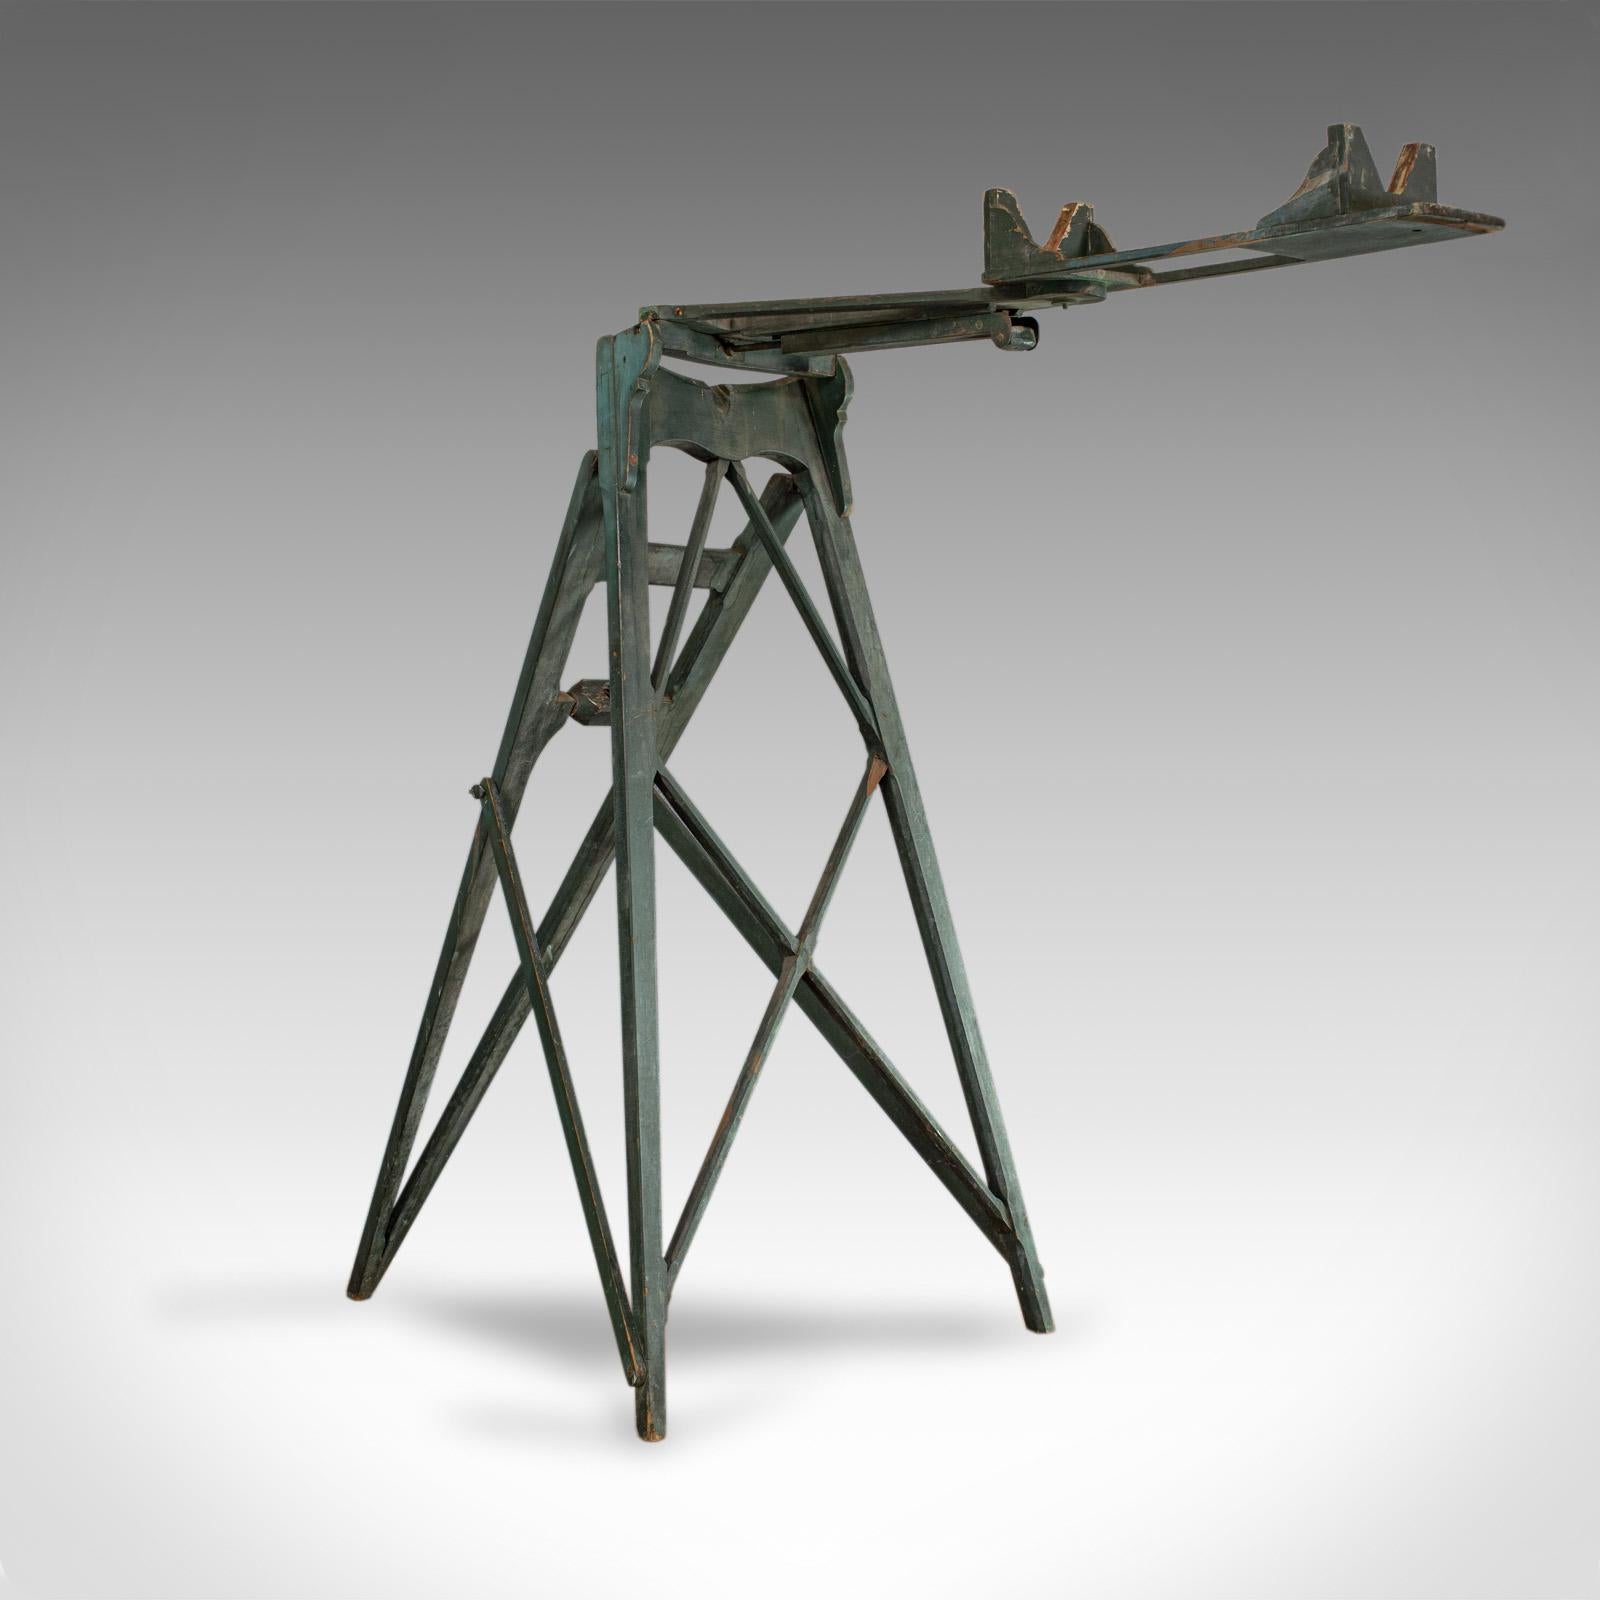 This is a large, antique telescope tripod. An English, pine observatory rack dating to the late 19th century, circa 1900.

Original painted finished displays a desirable aged patina
A rare, observatory telescope rack in large proportion
Highly